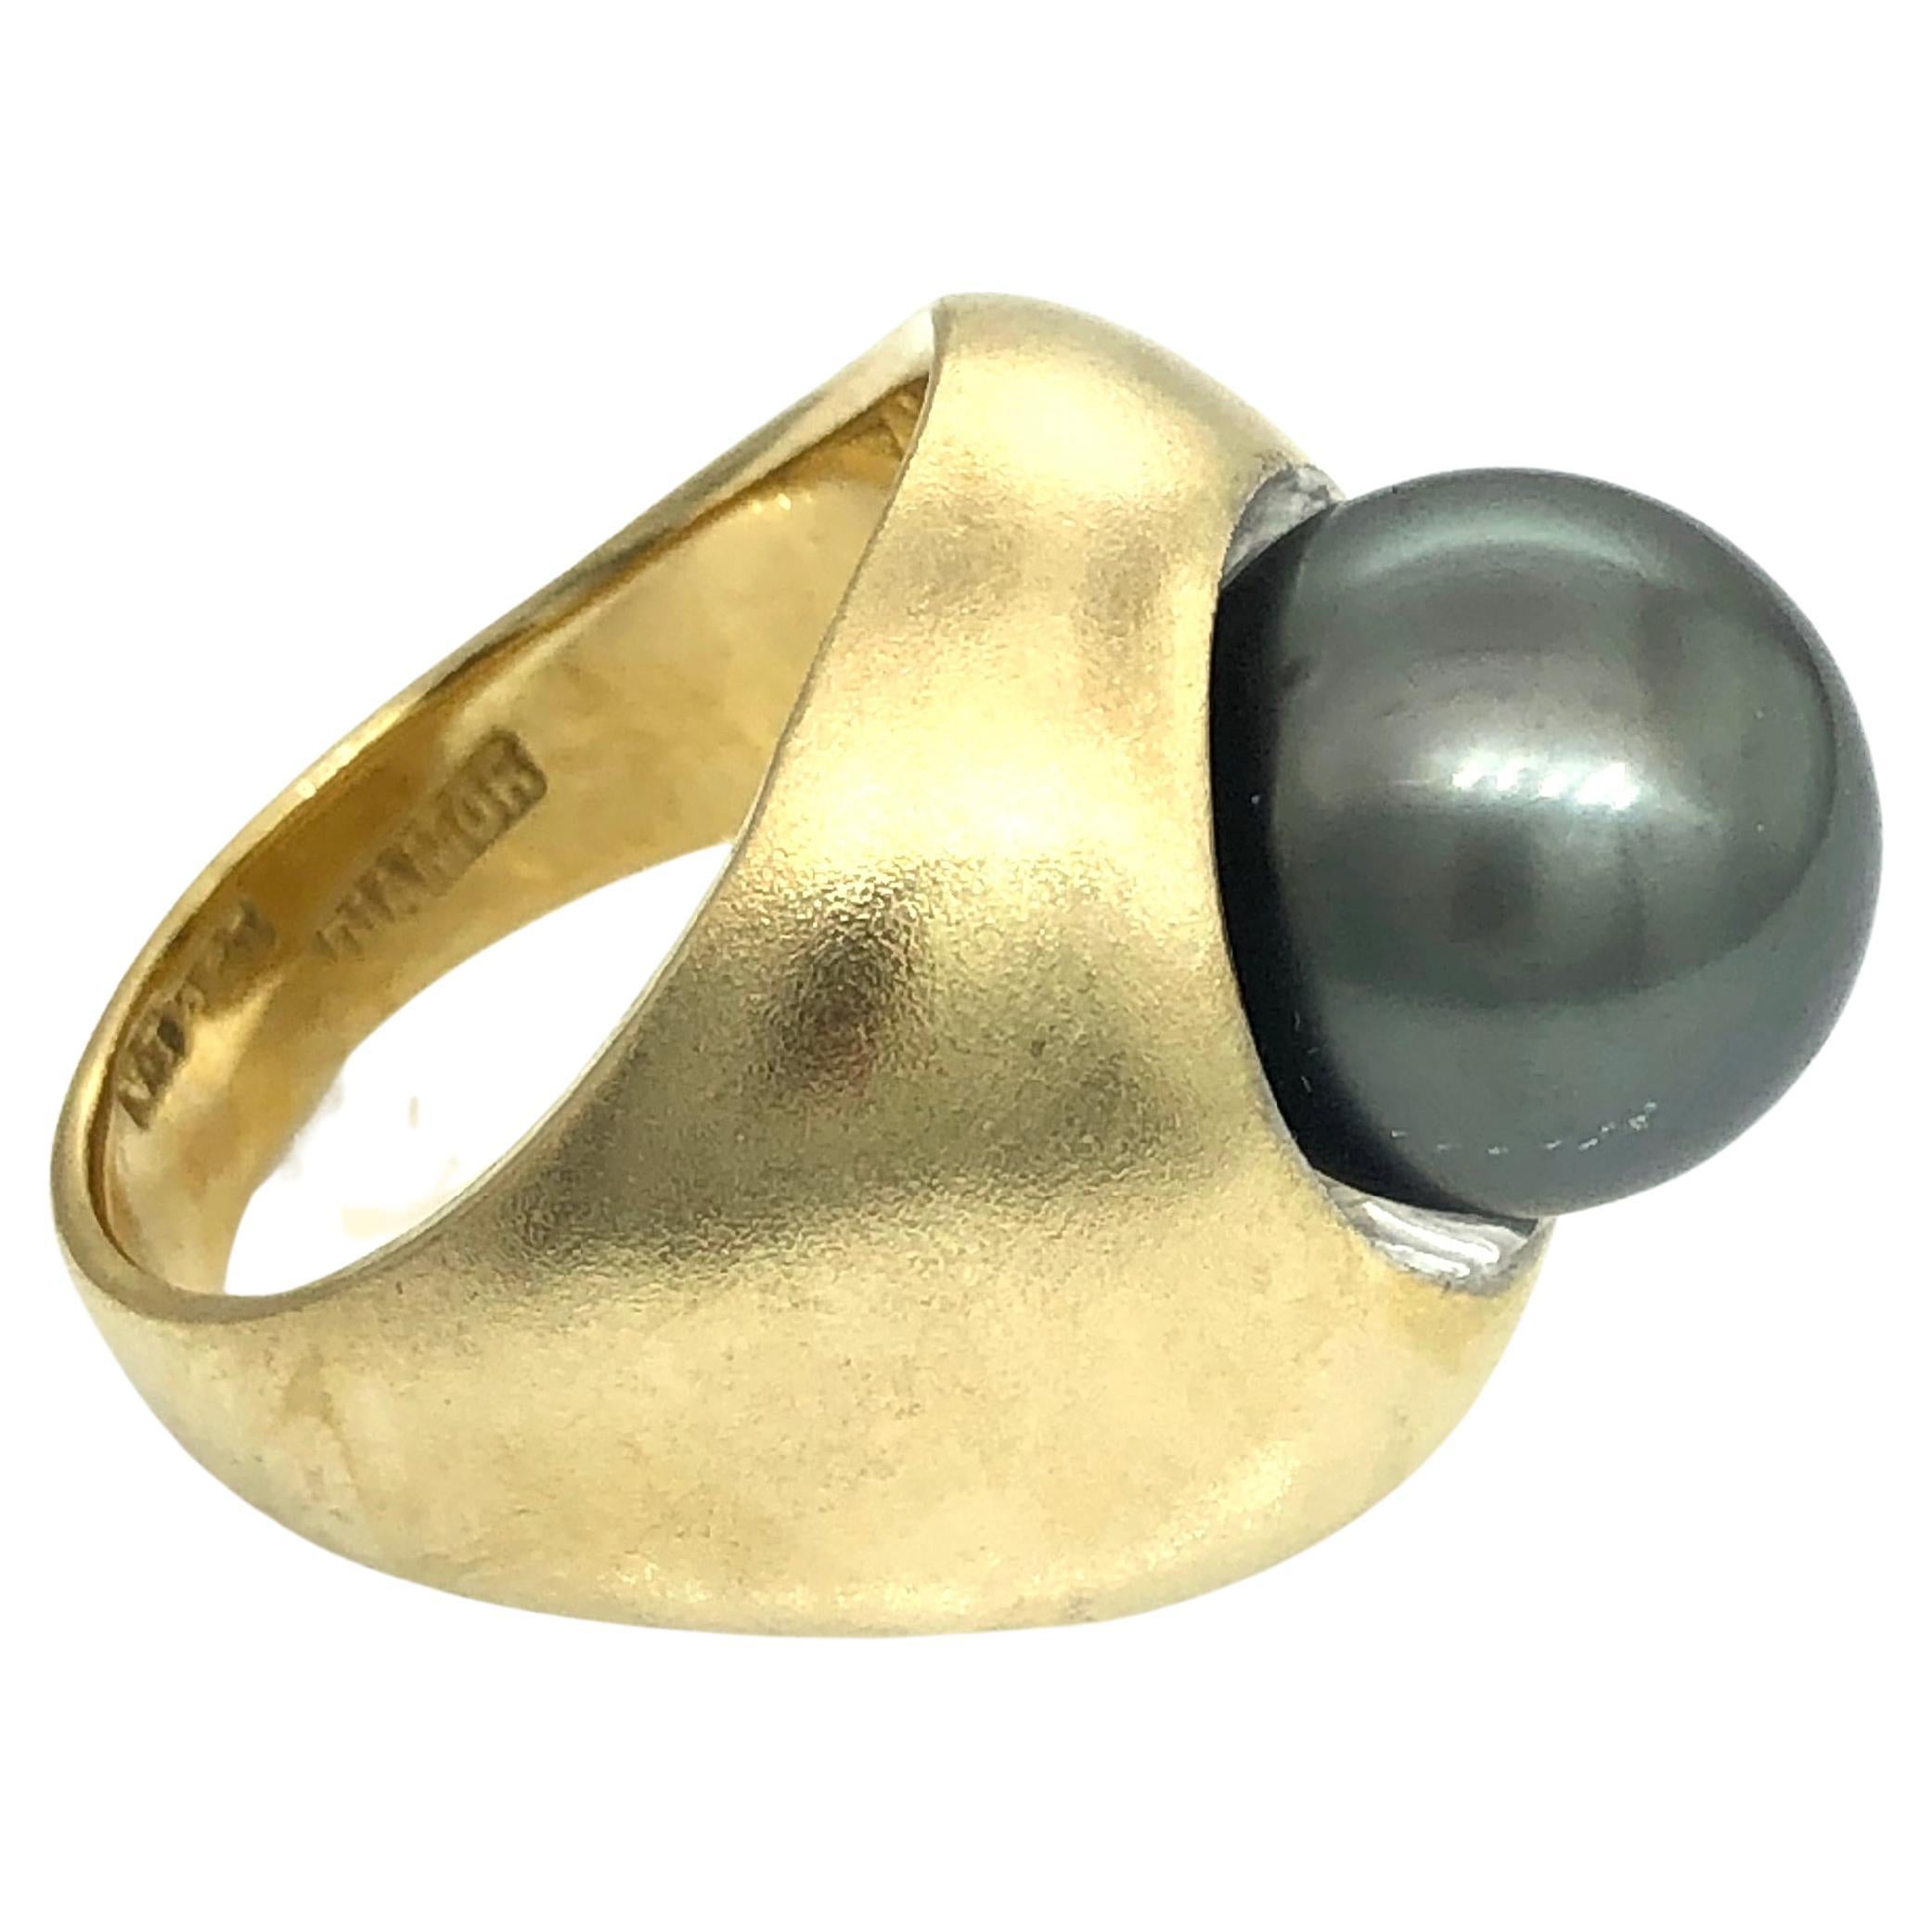 Fully hand made
solid 18 carat yellow gold ring in matte finish
set with recessed one stunning round Tahitian Black Pearl
Diameter of pearl is 12 mm
Size of the ring is N 1/2 (US Size 7)
Weight of the ring is 16.8 grams
This ring could be resized to